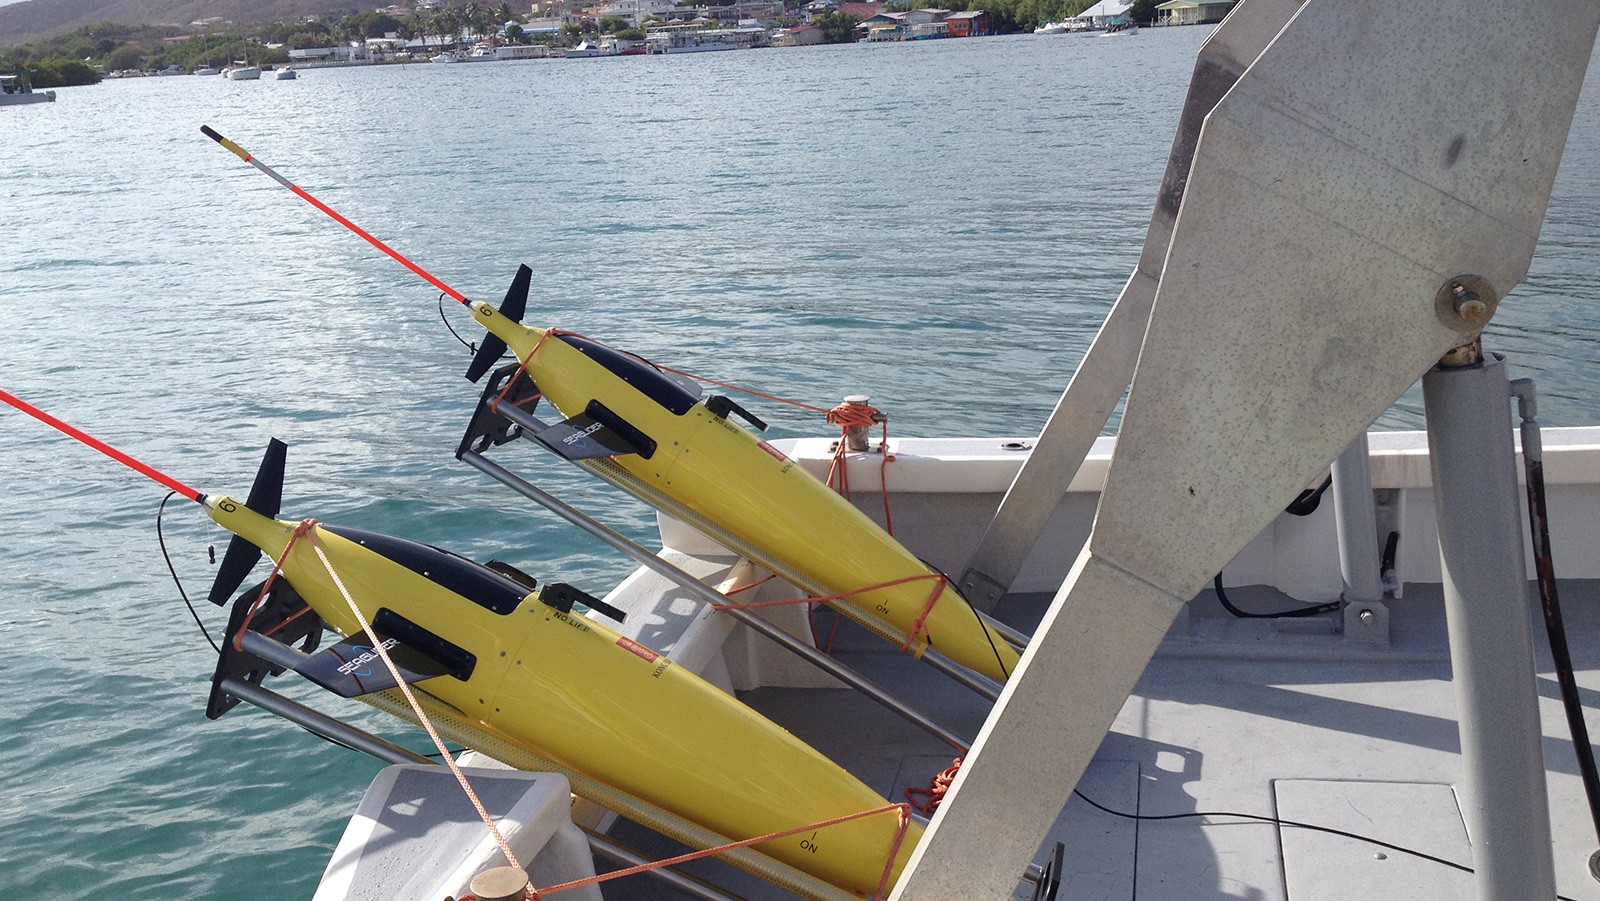 Two underwater gliders are ready for deployment from the R/V La Sultana, off the coast of Puerto Rico. Image credit: NOAA